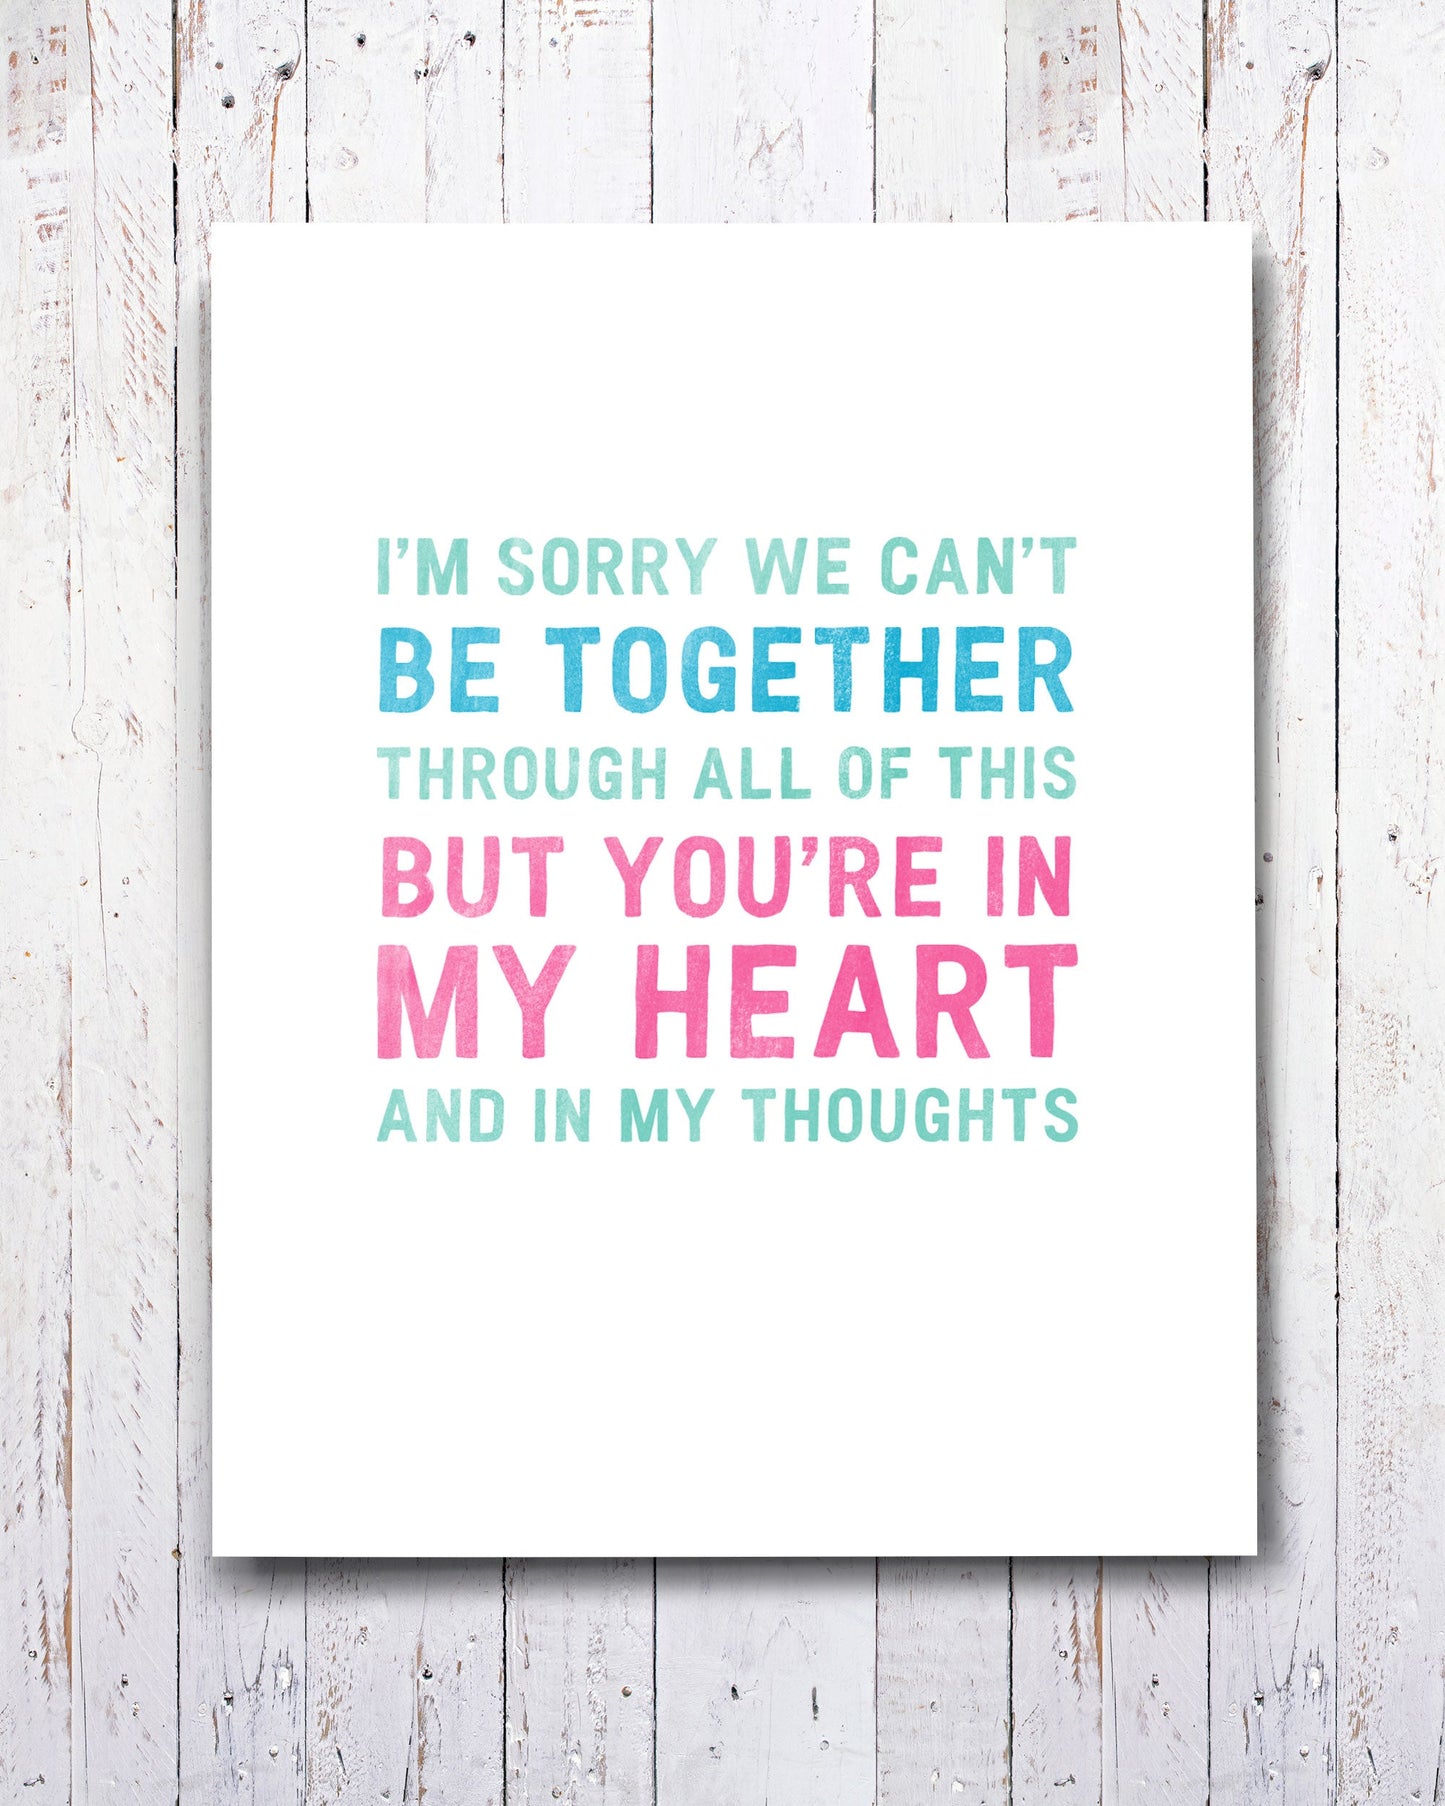 Can't Be Together Encouragement Card from Transit Design - Smirkantile